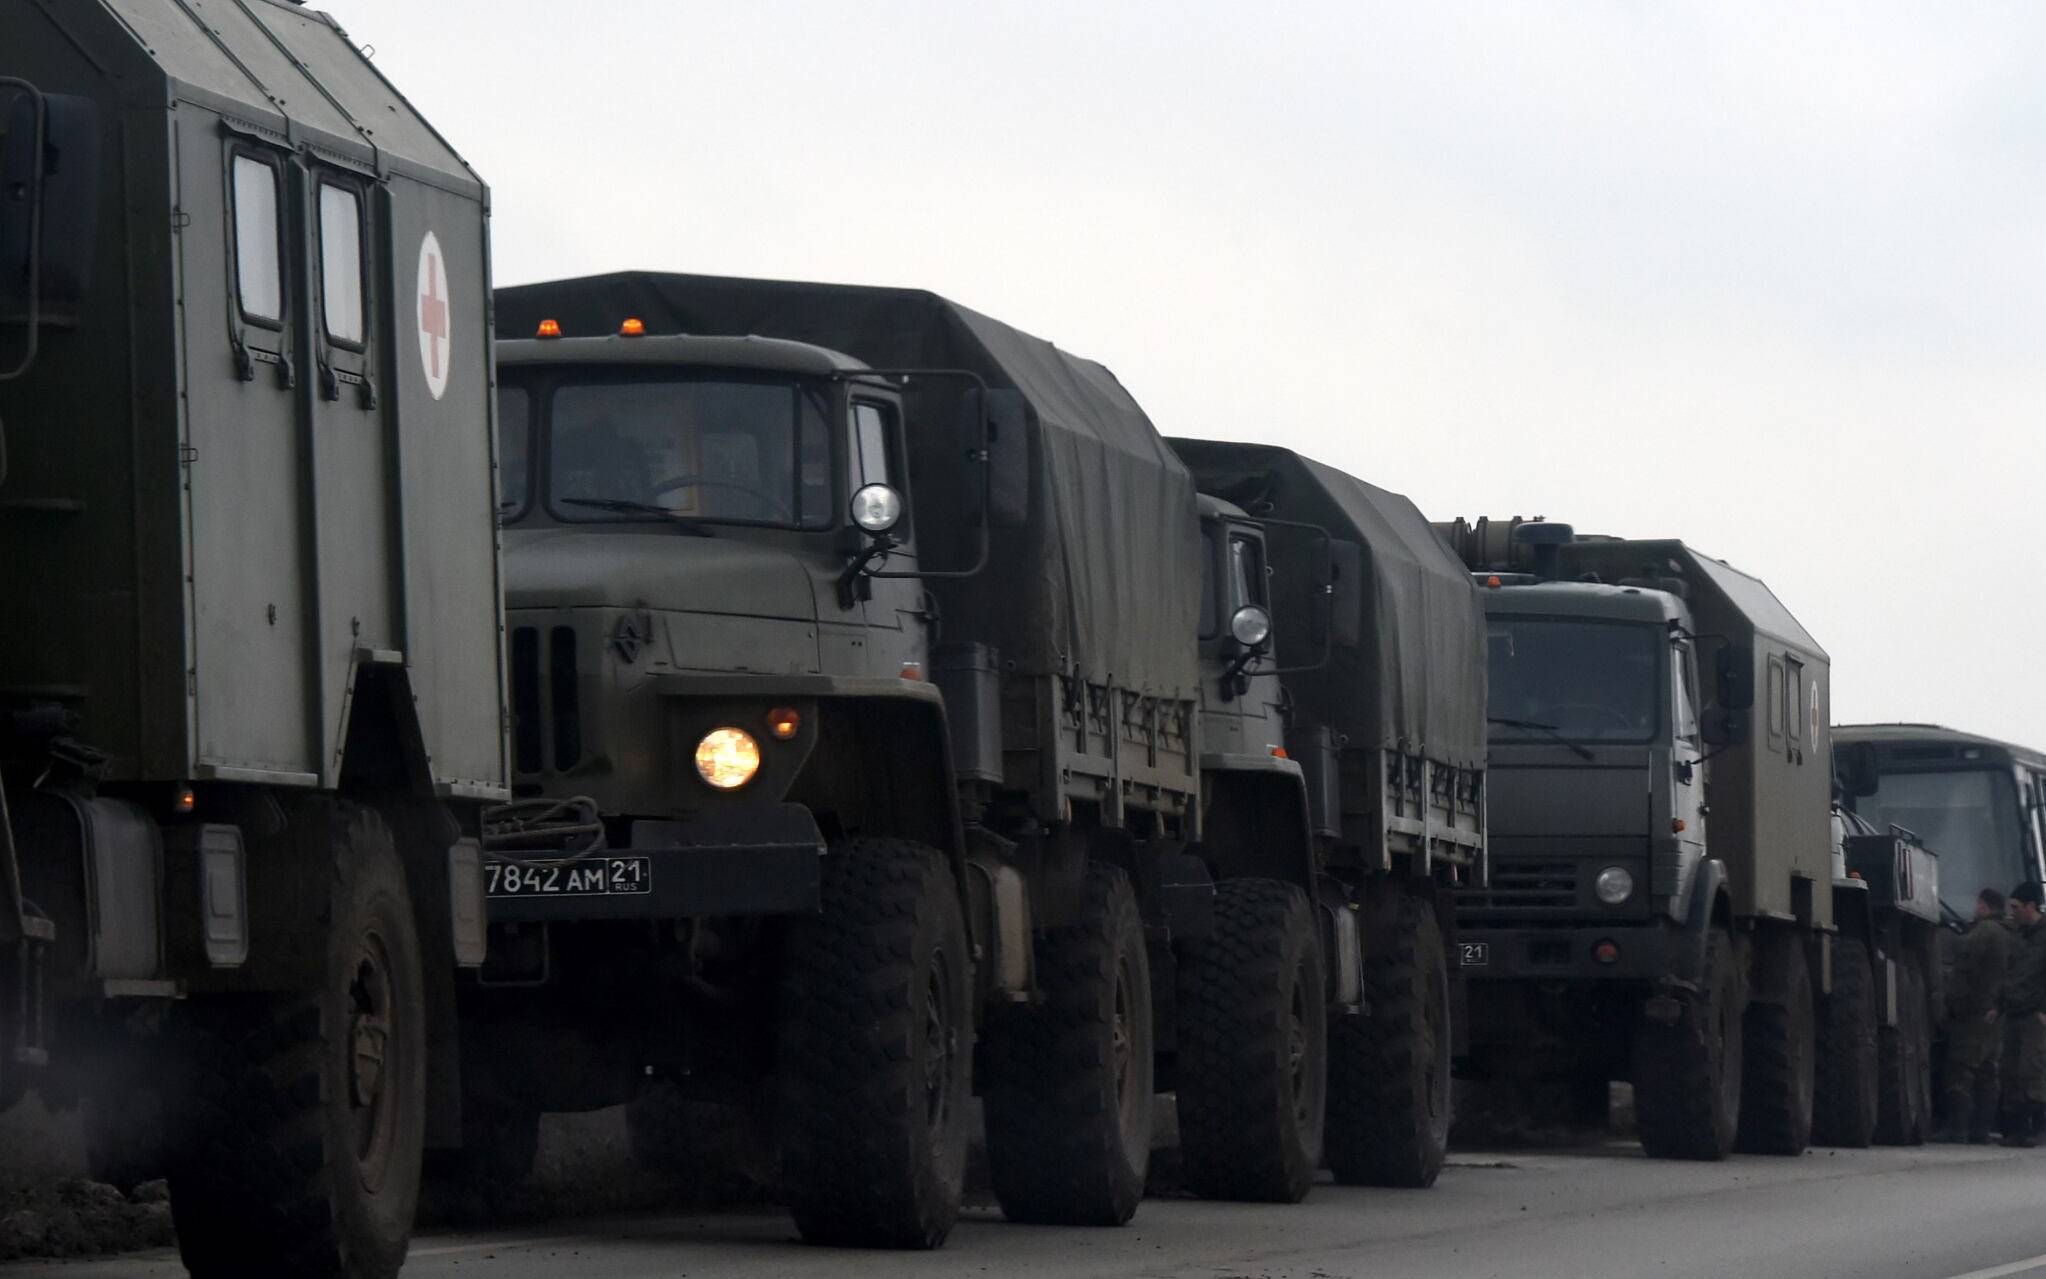 Russian military trucks and buses are seen on the side of a road in Russia's southern Rostov region, which borders the self-proclaimed Donetsk People's Republic, on February 23, 2022. (Photo by STRINGER / AFP)